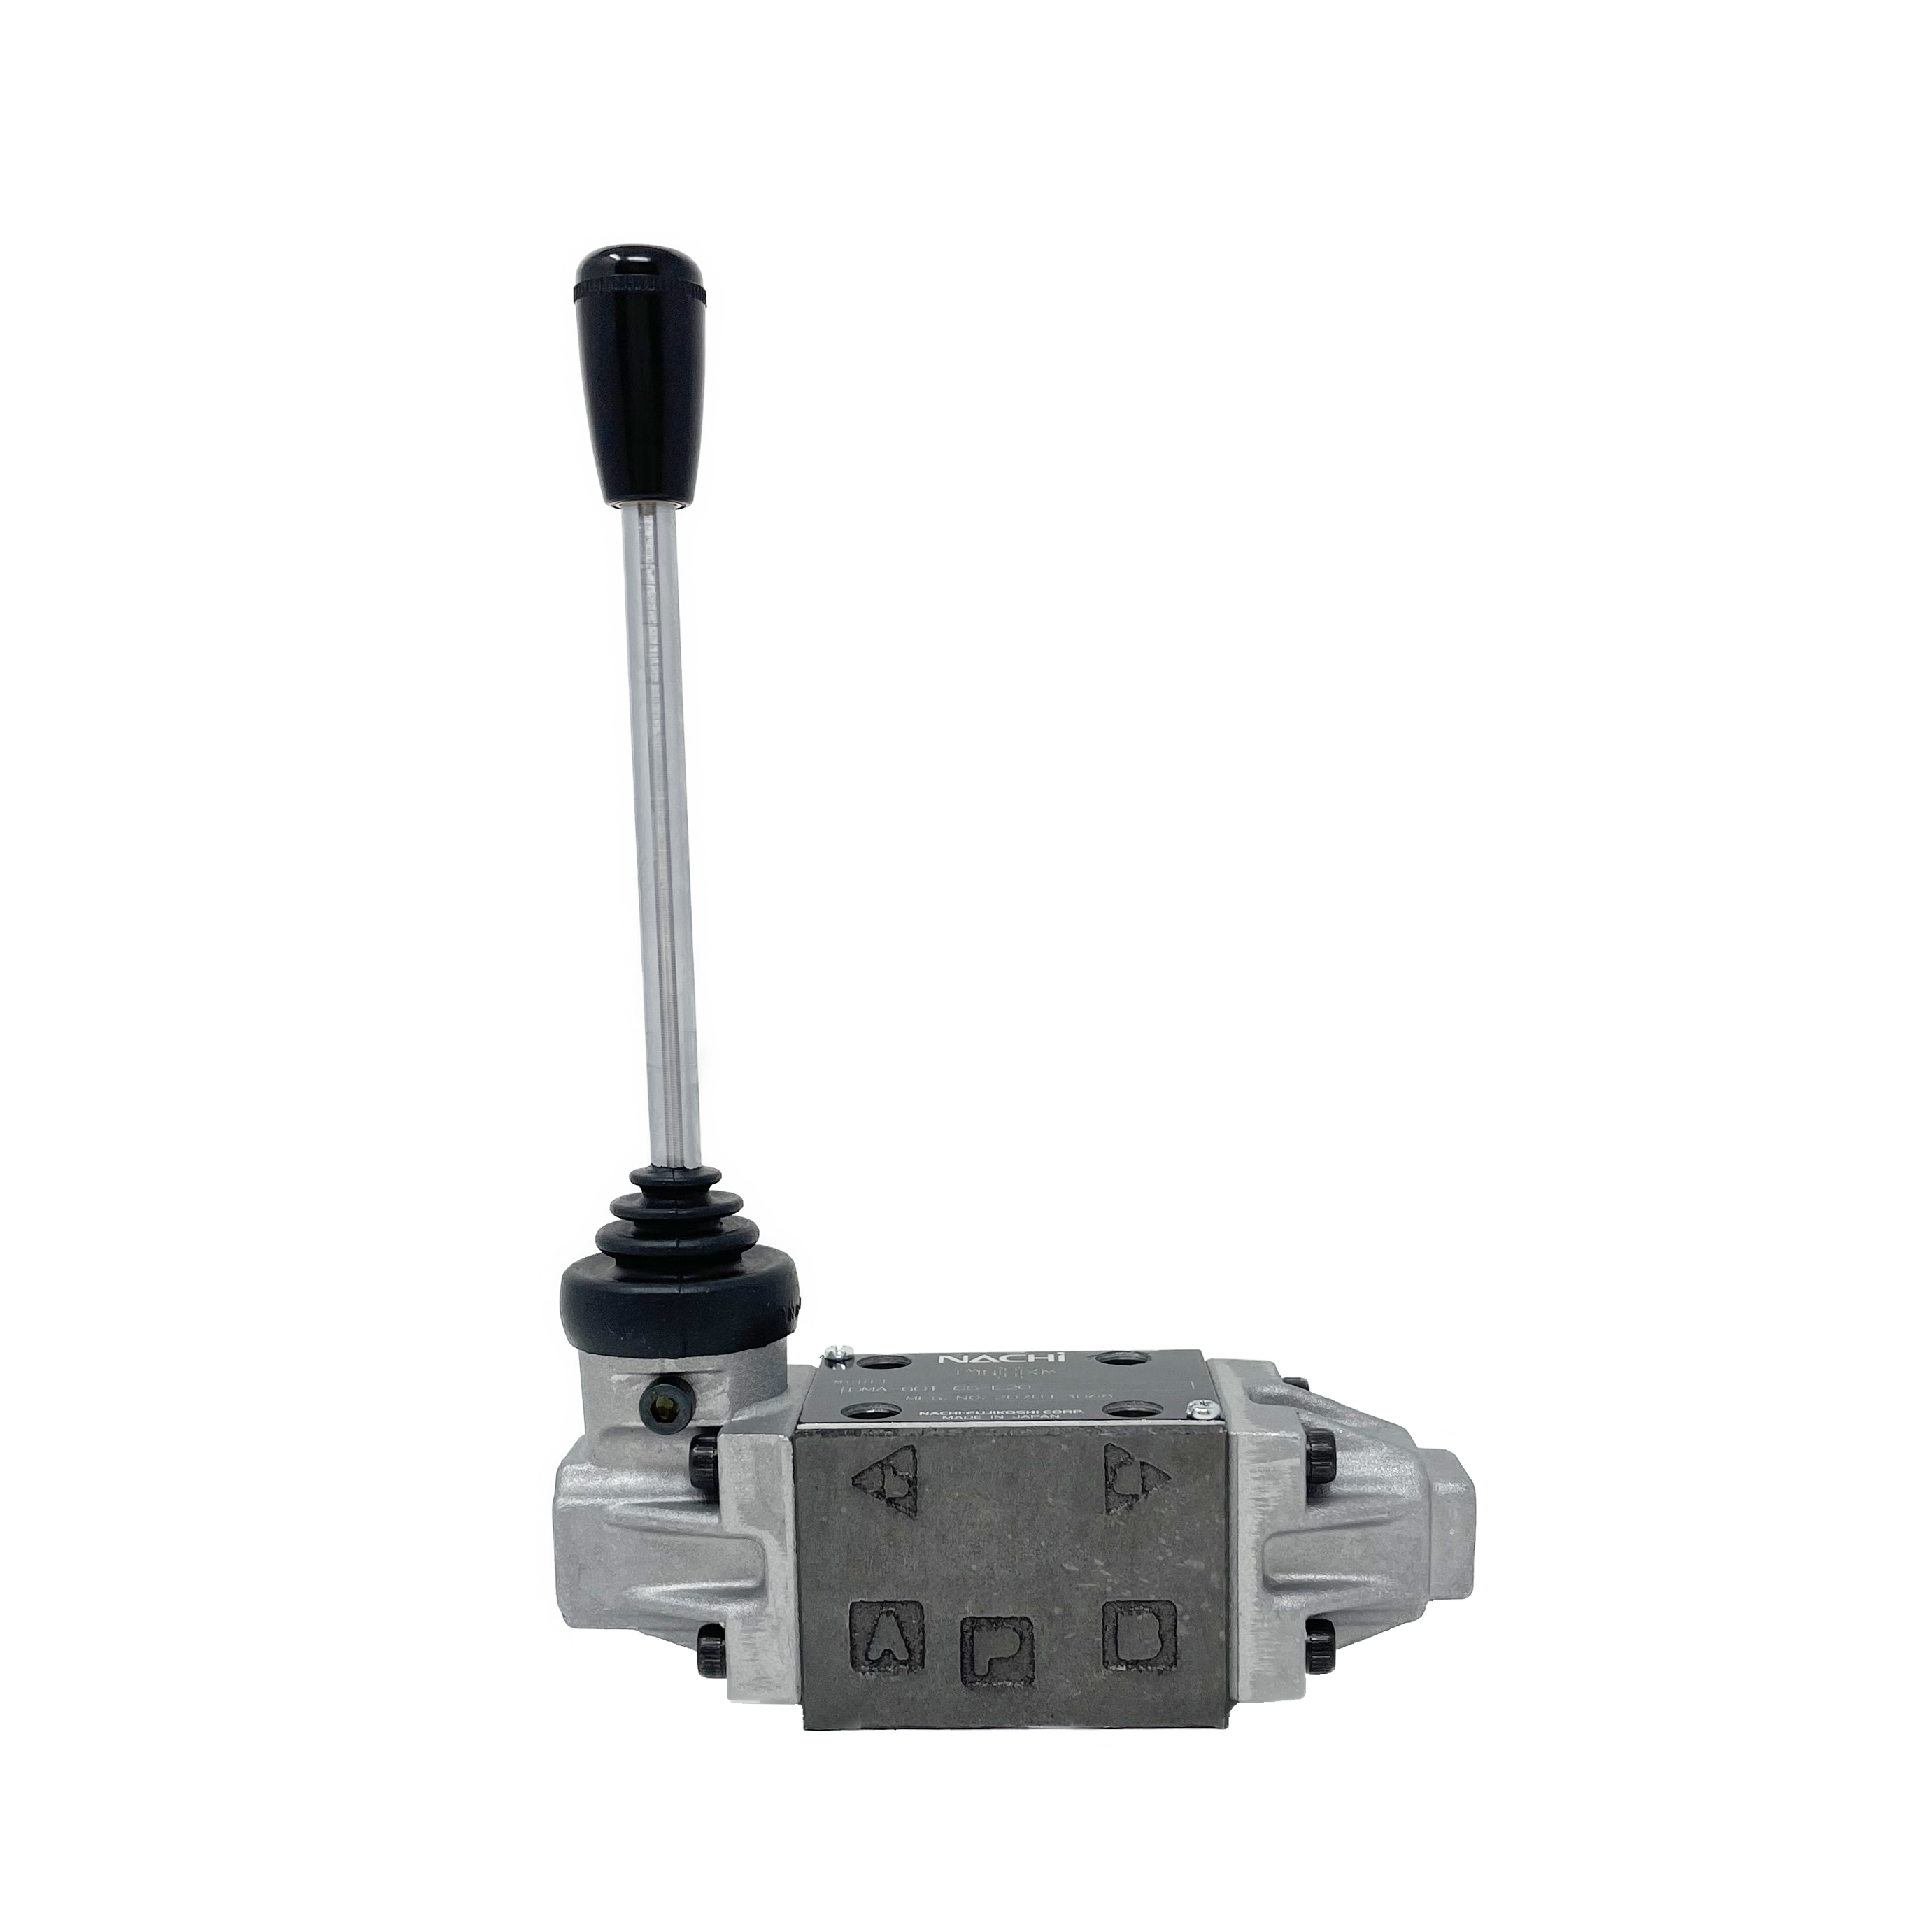 DMA-G01-C5-E20 : Nachi Manual Lever Valve, 4-Way, D03 (NG6), 10.5GPM, 5075psi, All Ports Blocked Neutral, Spring Centered